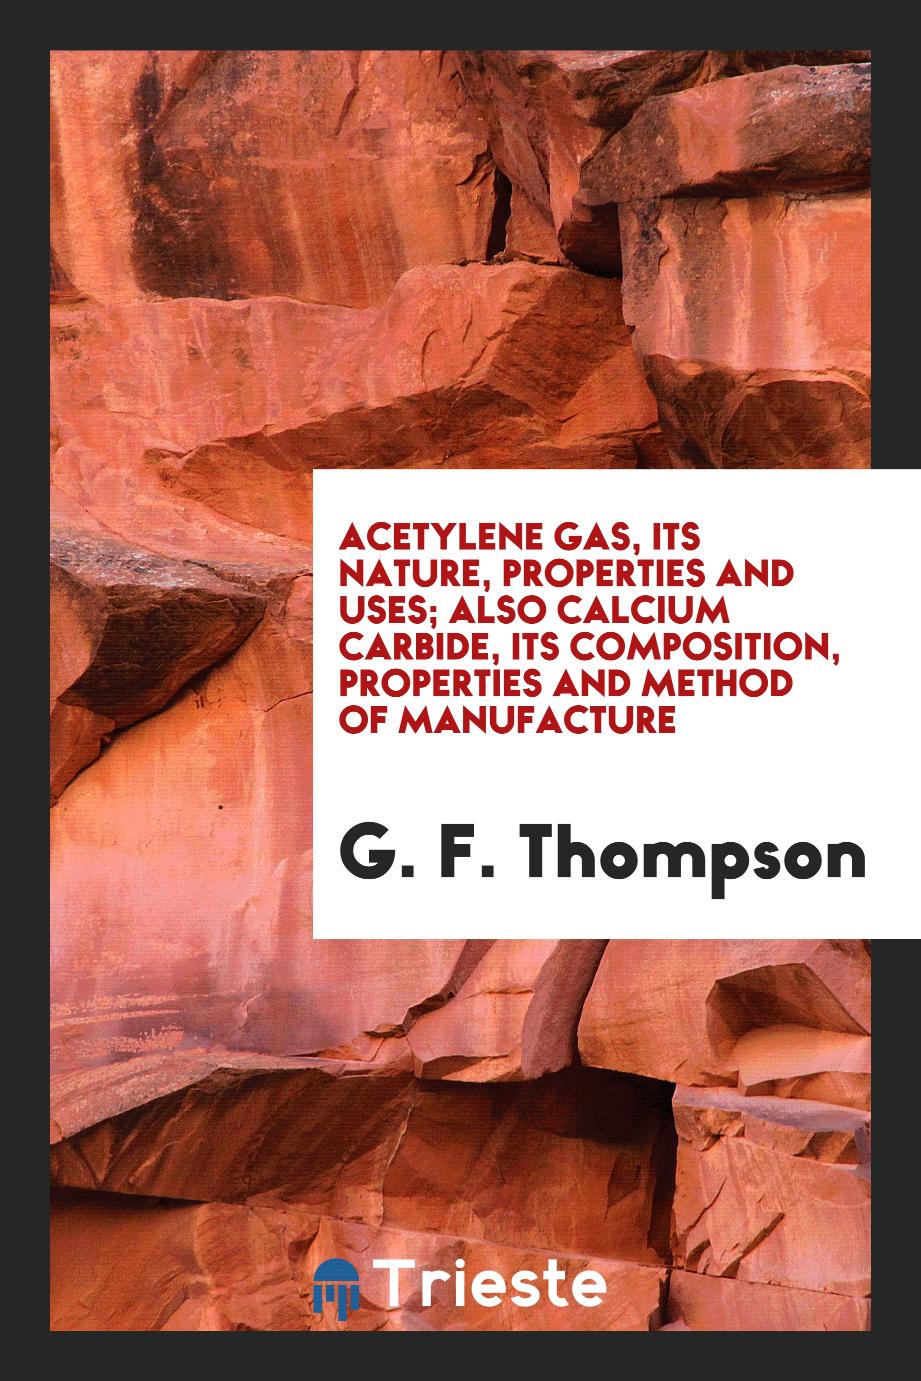 G. F. Thompson - Acetylene Gas, Its Nature, Properties and Uses; Also Calcium Carbide, Its Composition, Properties and Method of Manufacture